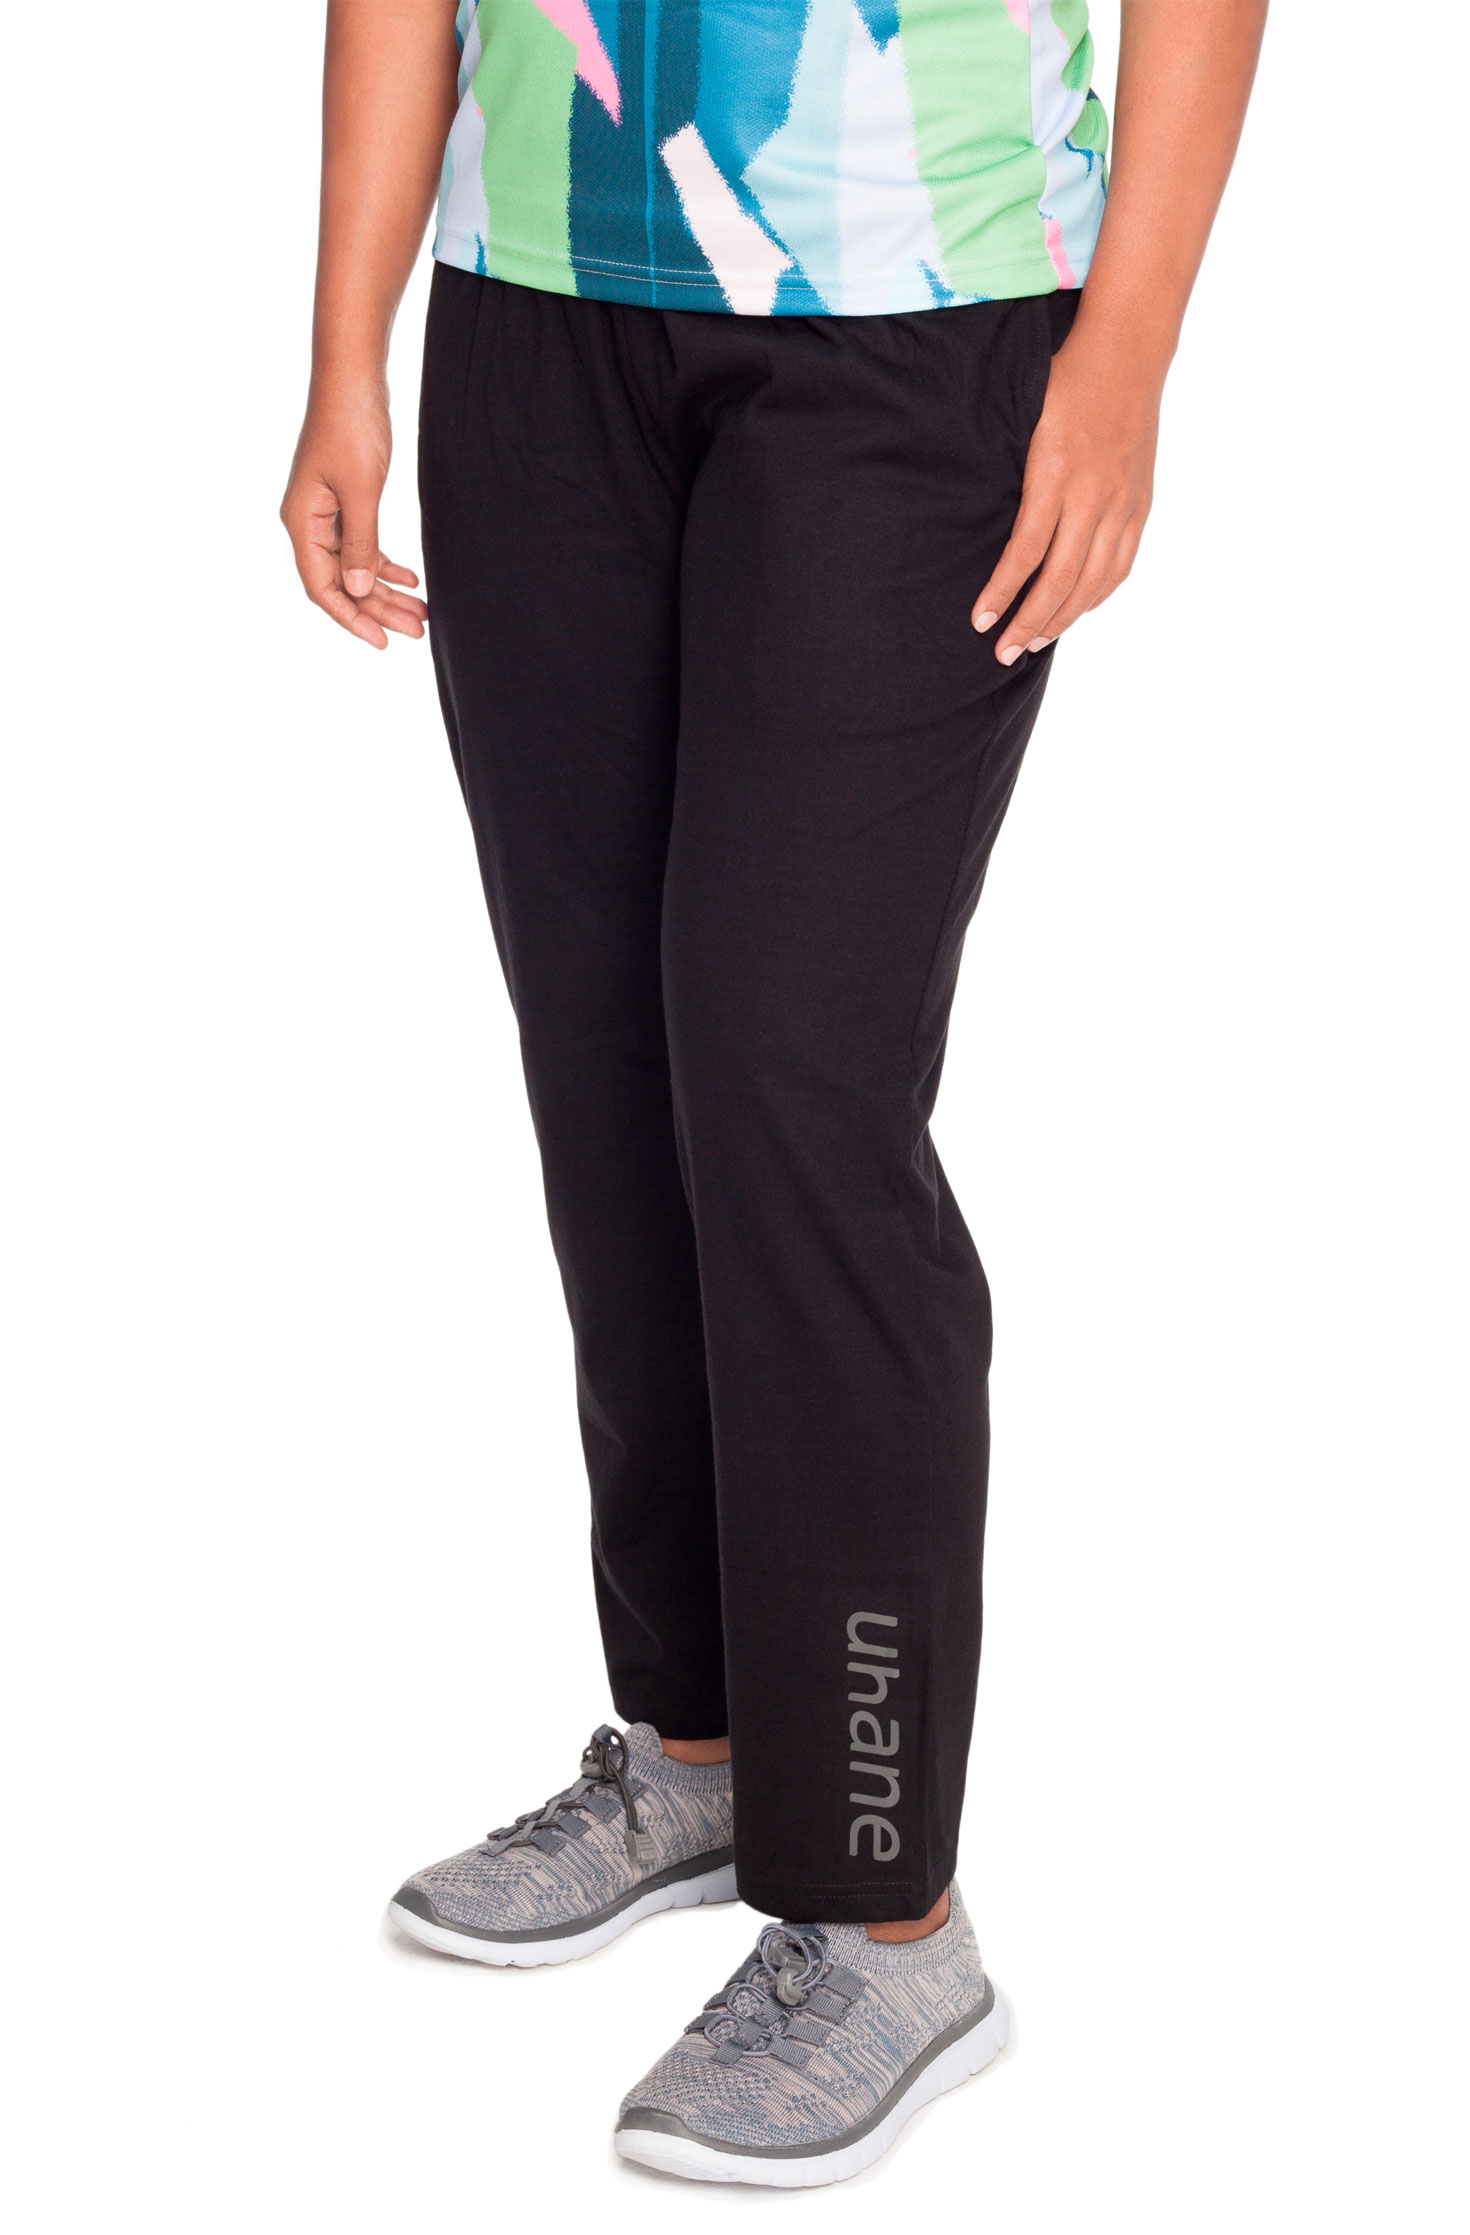 Cotton Yoga Pants For Work Loose Fitting